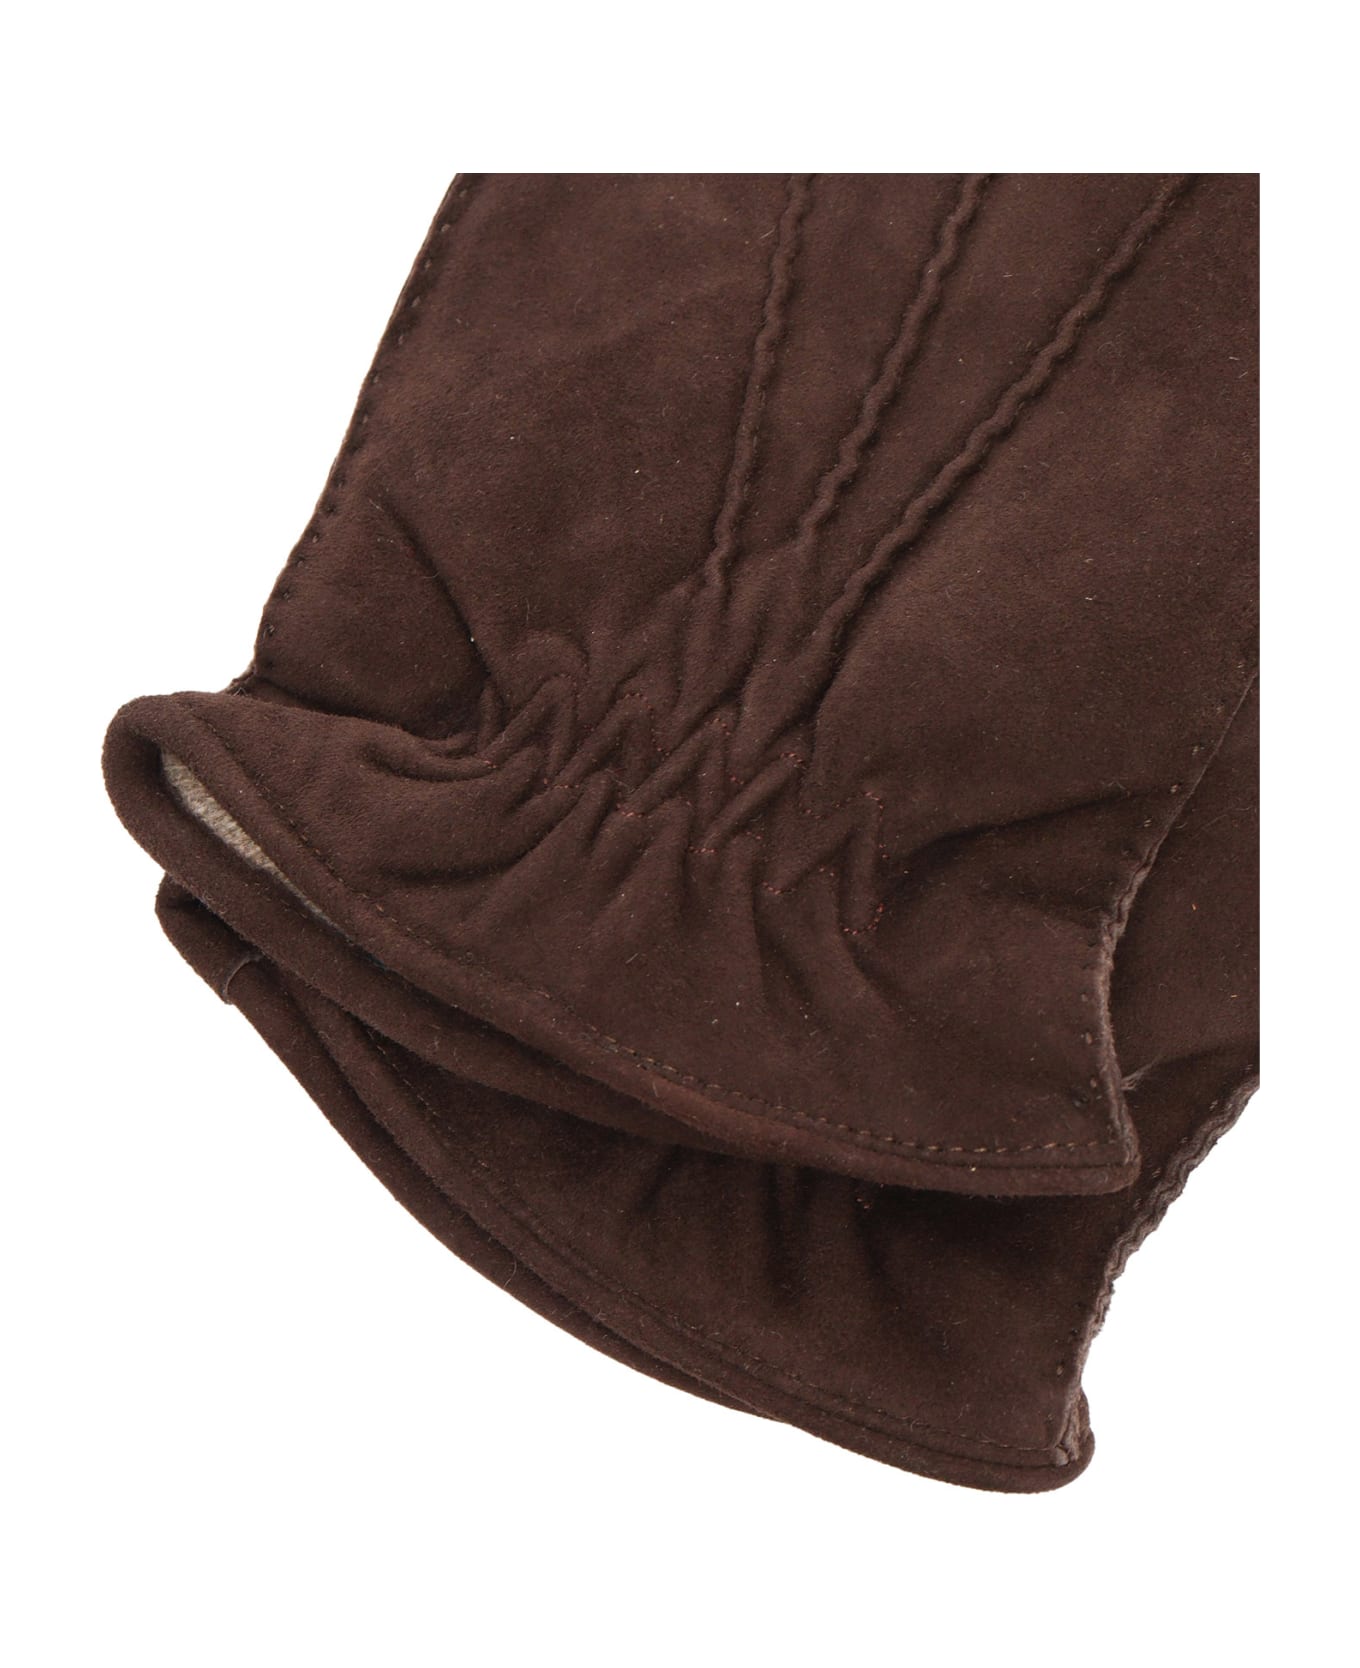 Orciani Suede Gloves - BROWN